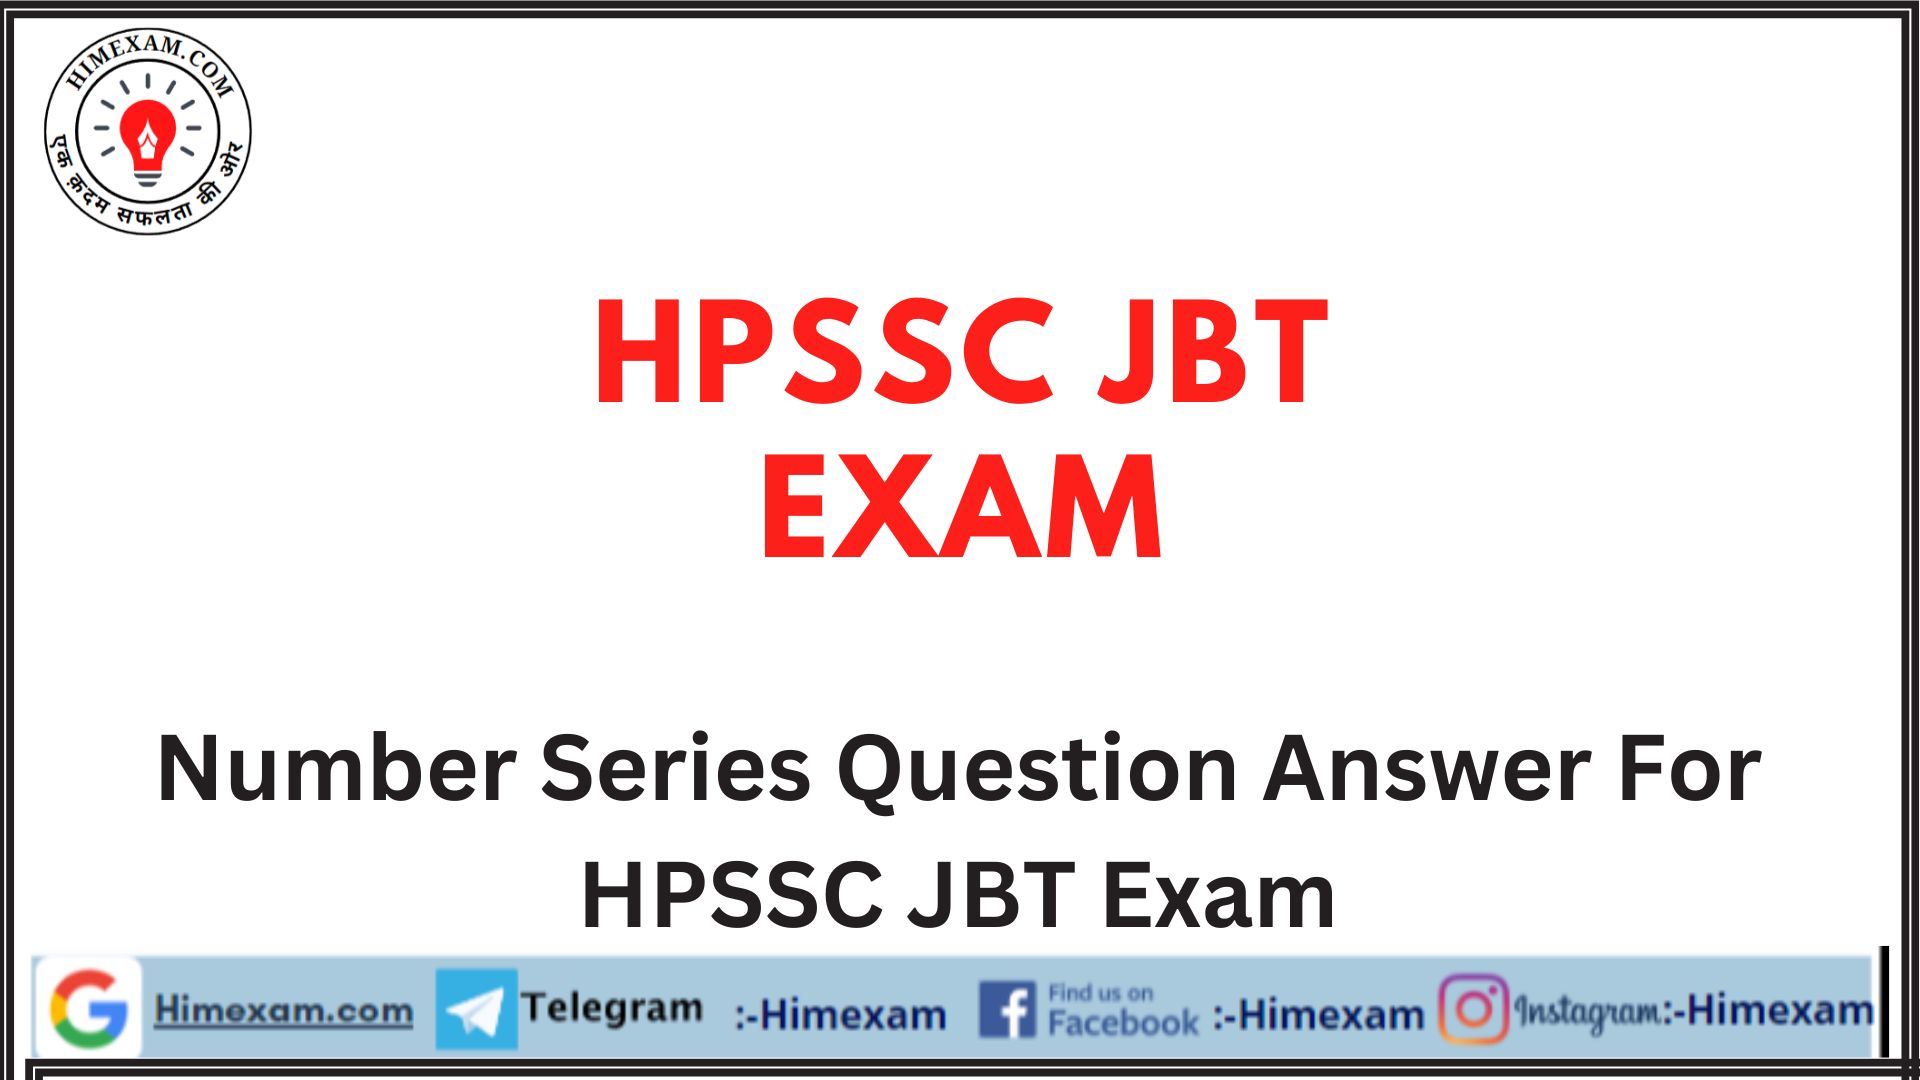 Number Series Question Answer For HPSSC JBT Exam